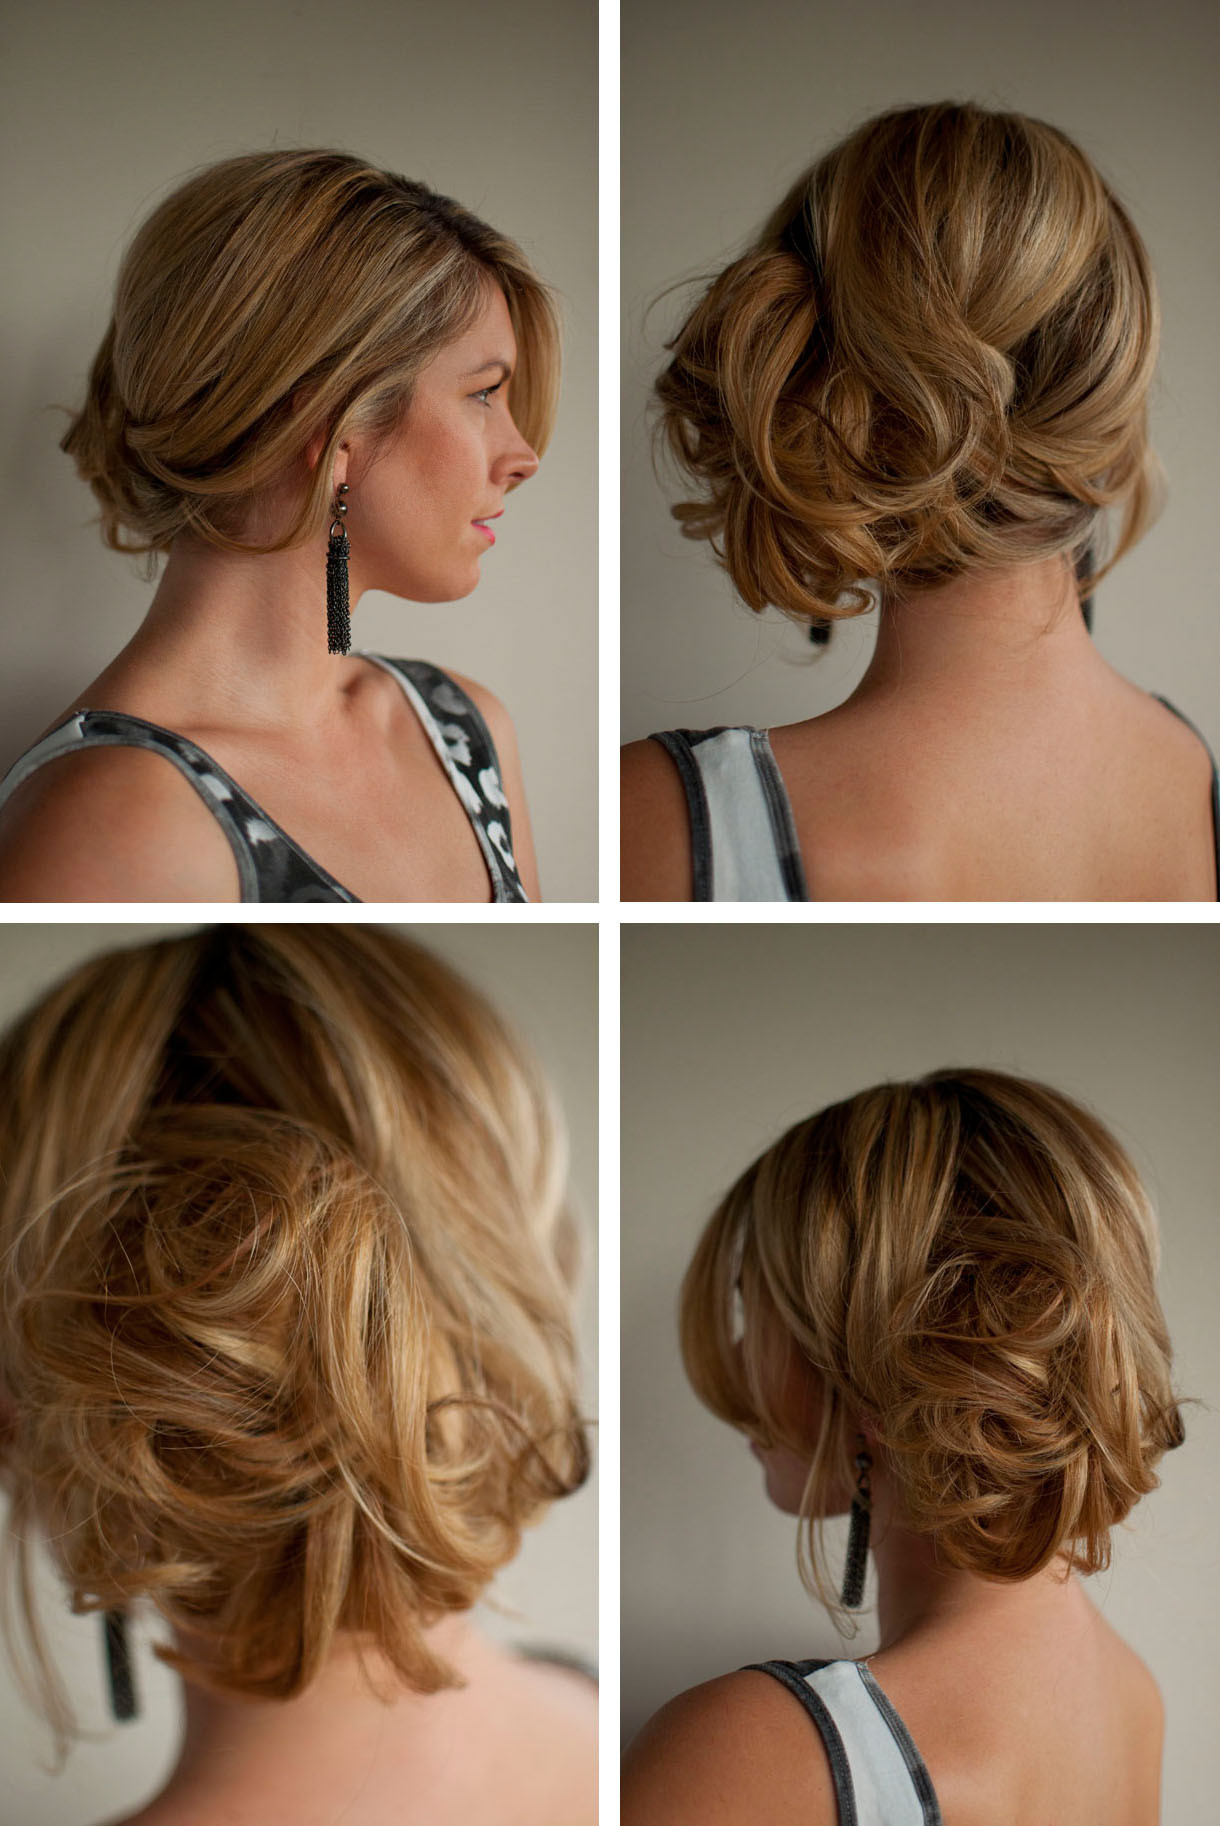 How To Do A 1920S Hairstyle For Long Hair
 Hair Romance Reader Question Hairstyles for a 1920s